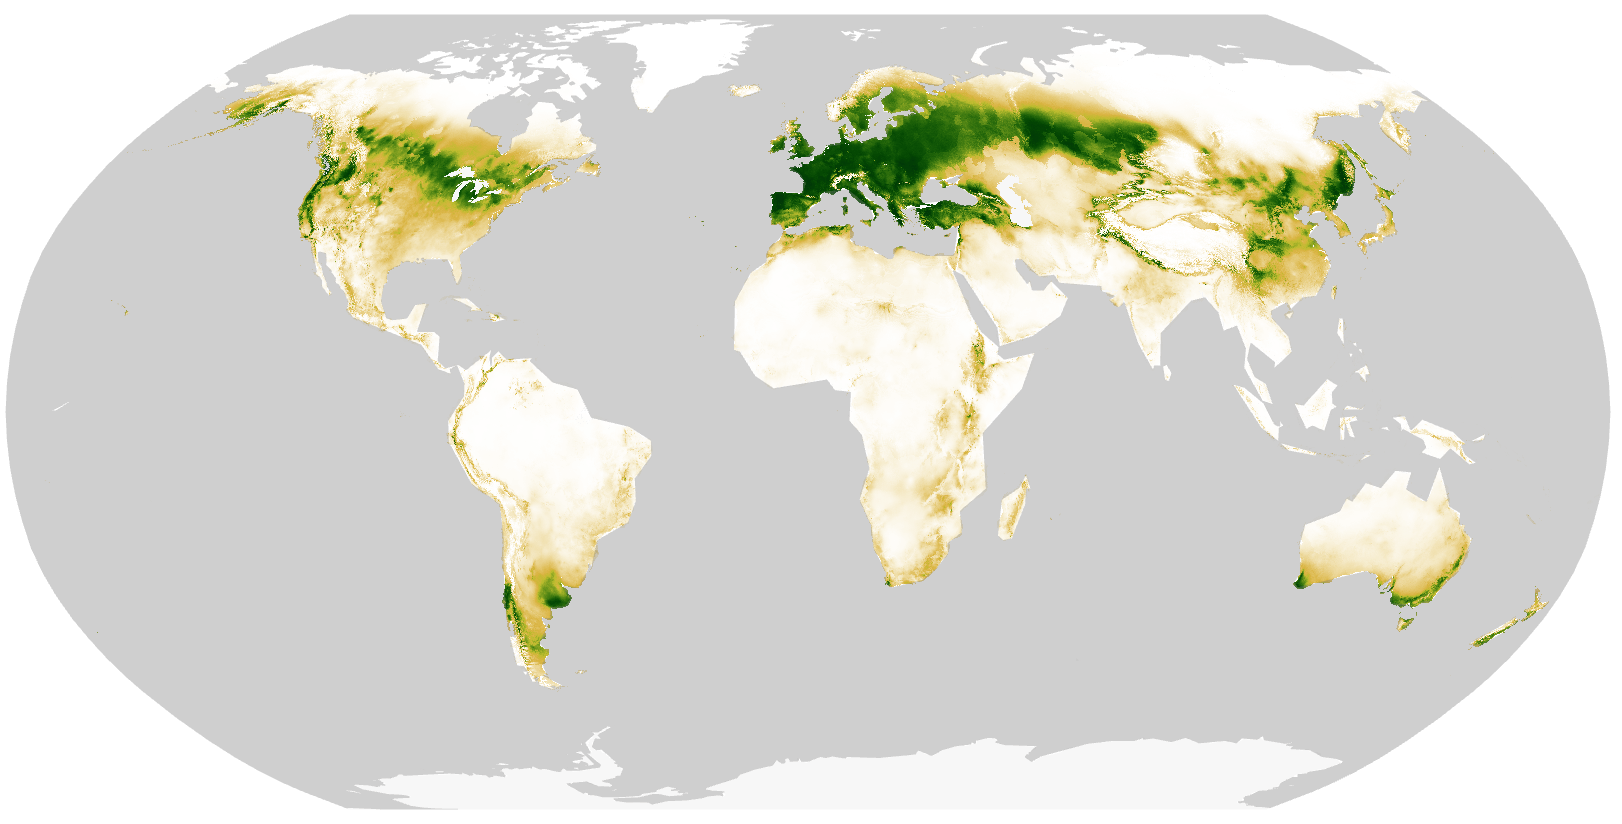 Current global wheat suitability 2050.